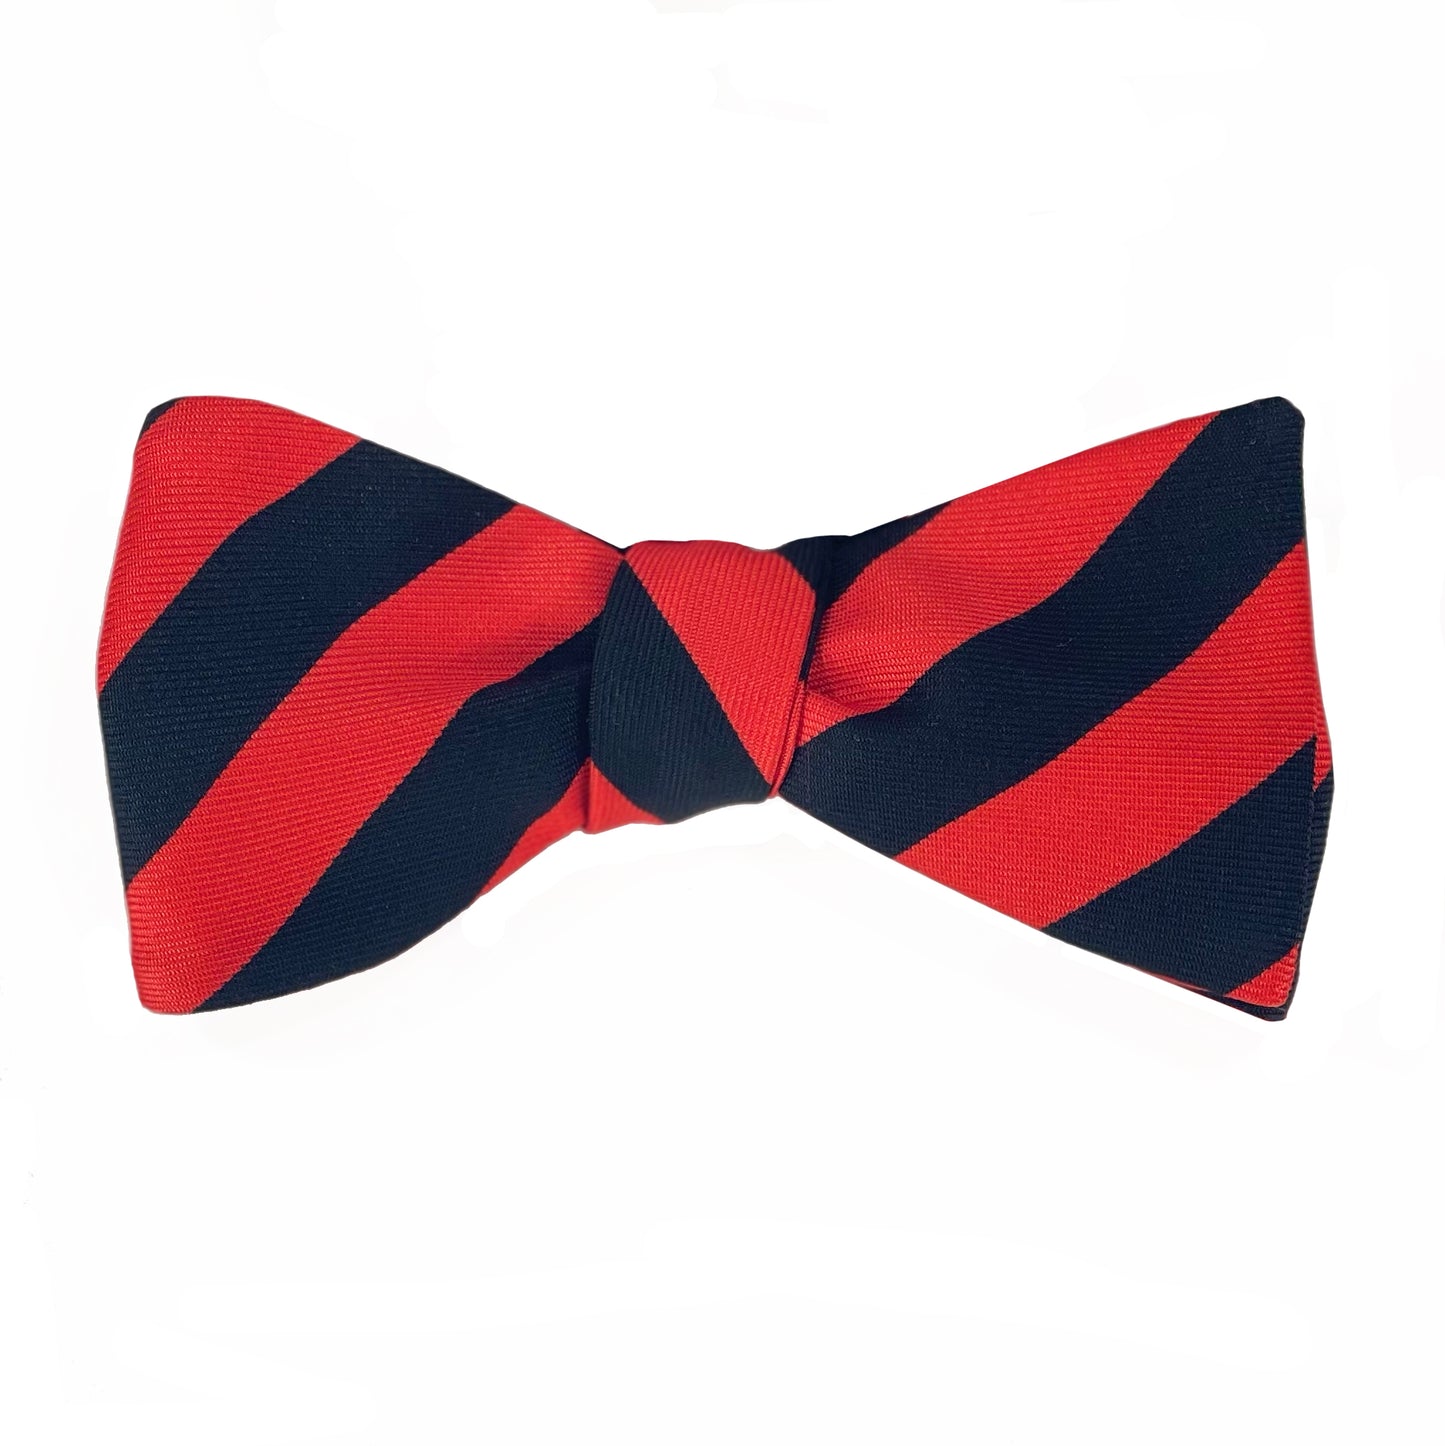 Moser's Bow Tie